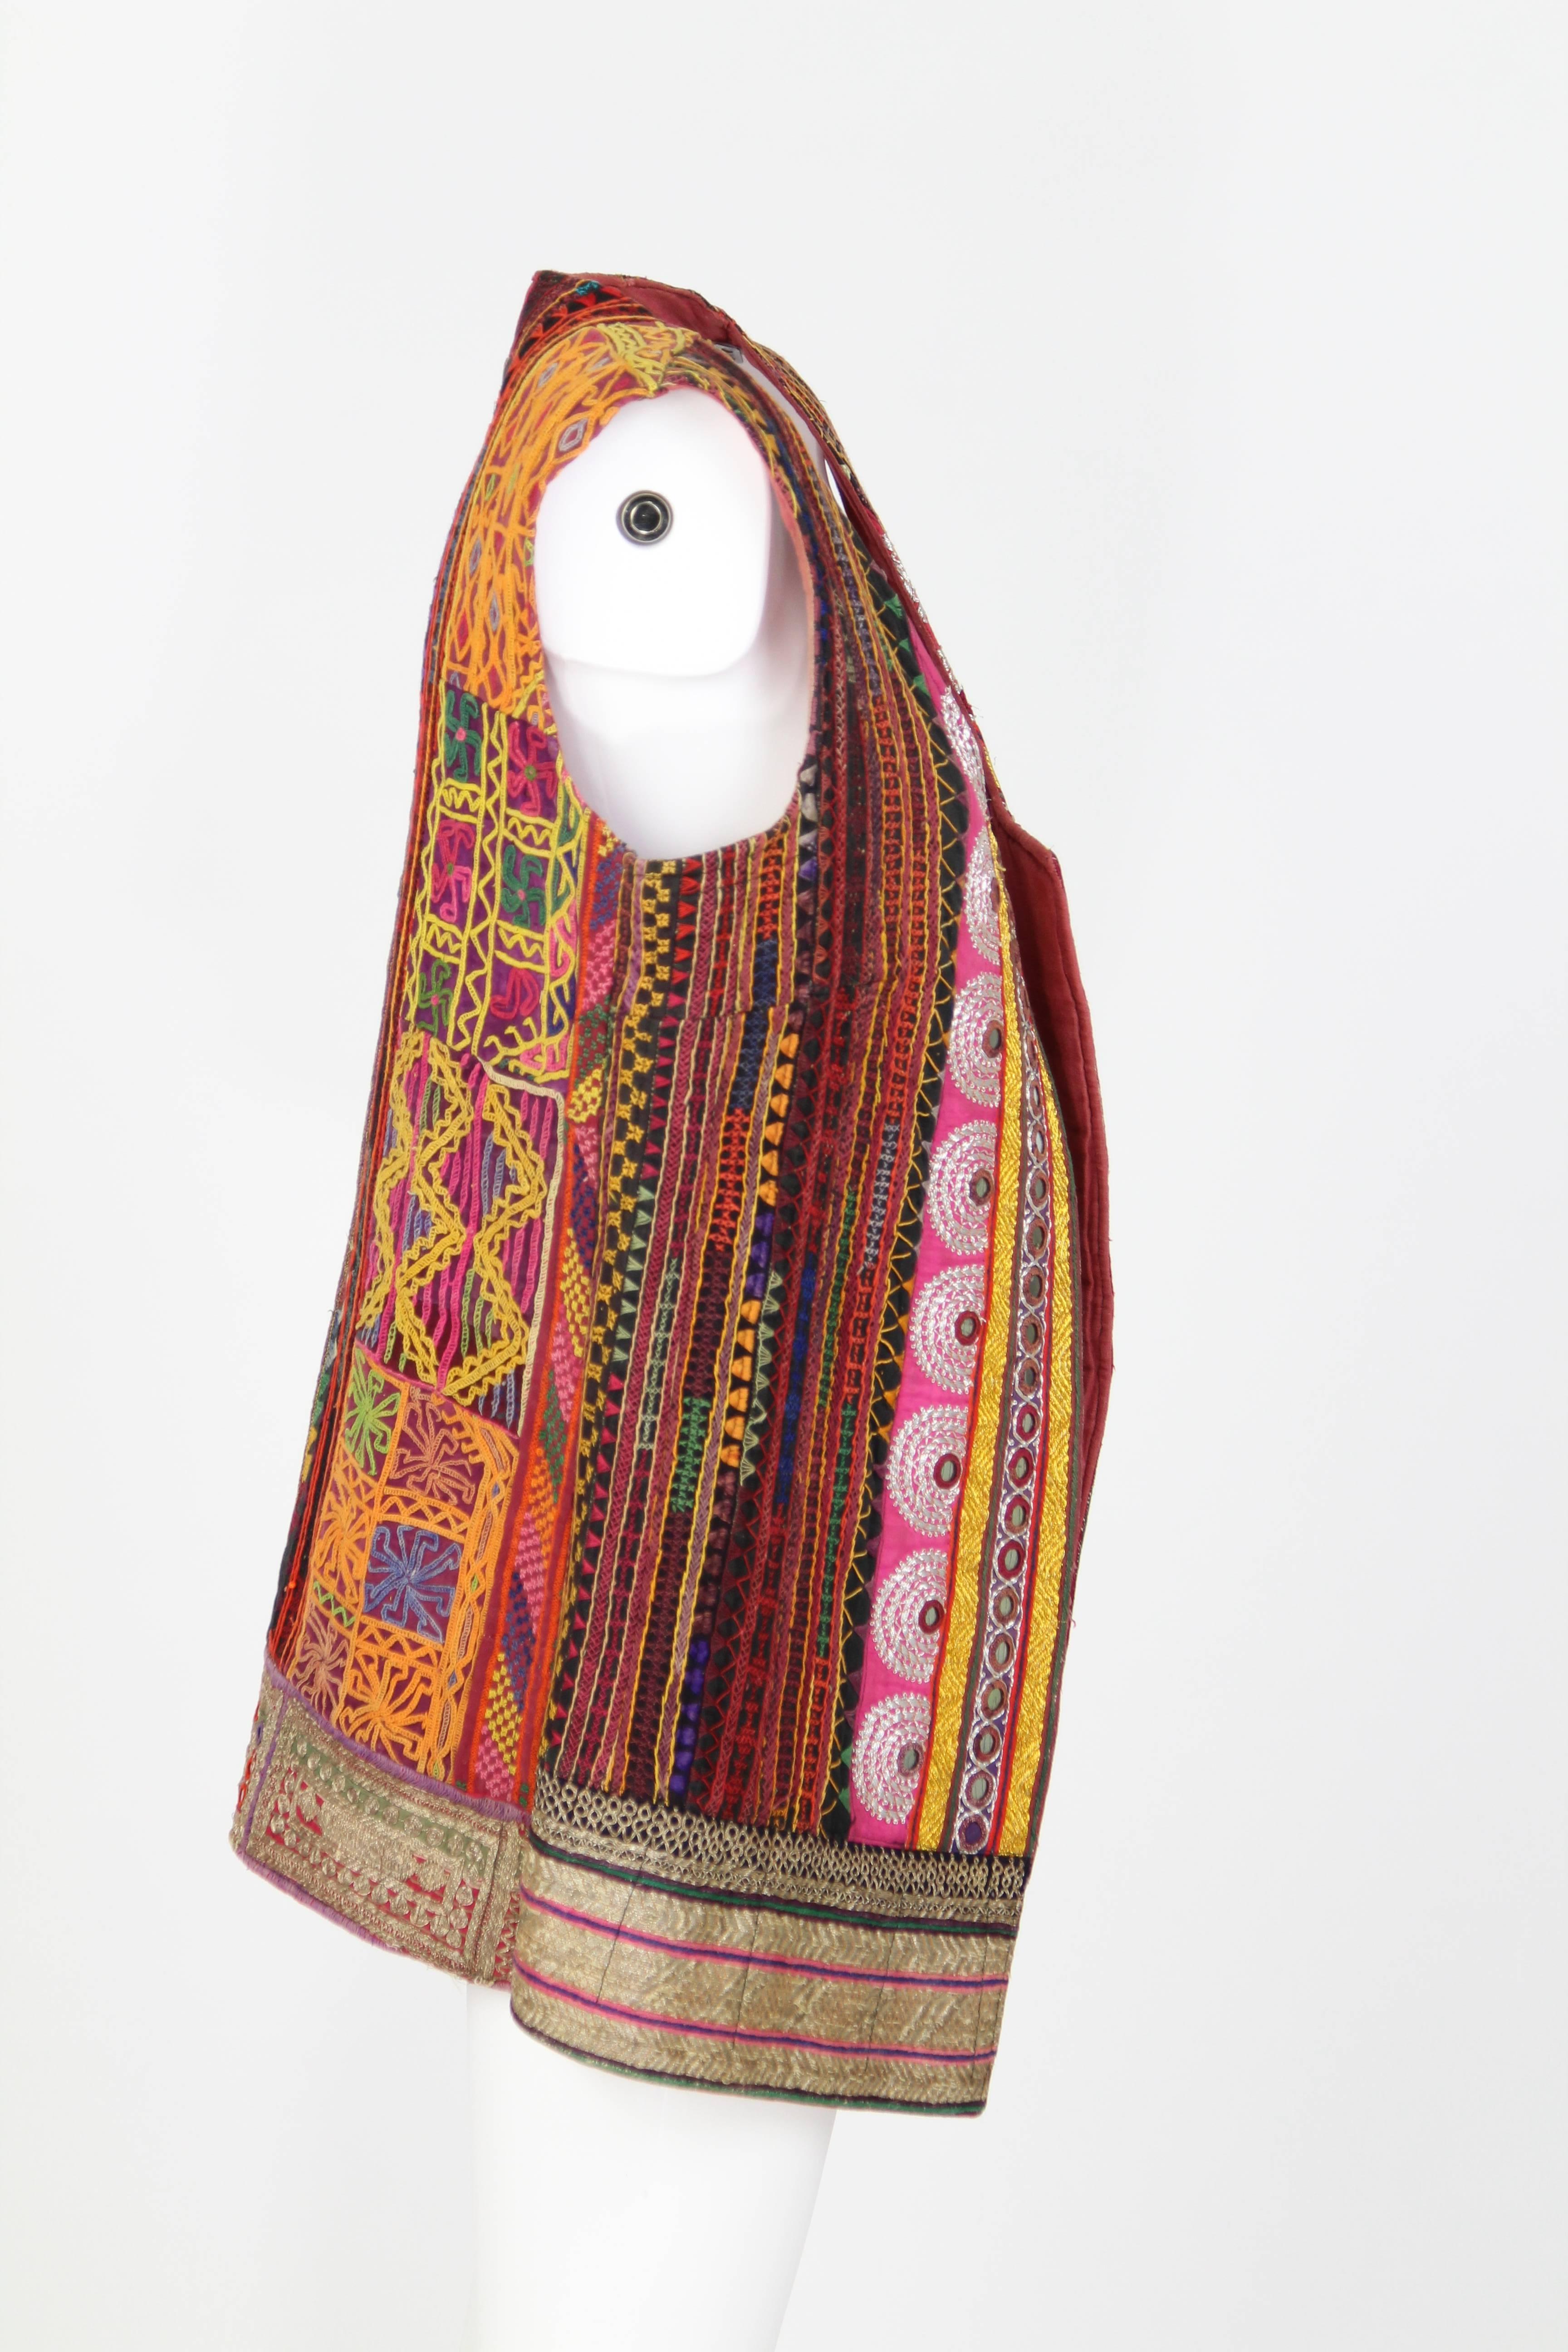 1980s Colorful Ethnic Gilet carfelly handmade and embroidered, made of original ethnic cloths from Rajasthan, a region of India. 
Small mirrors are sewn all over the item giving it a special allure.
The item presents signs of use but it is overall